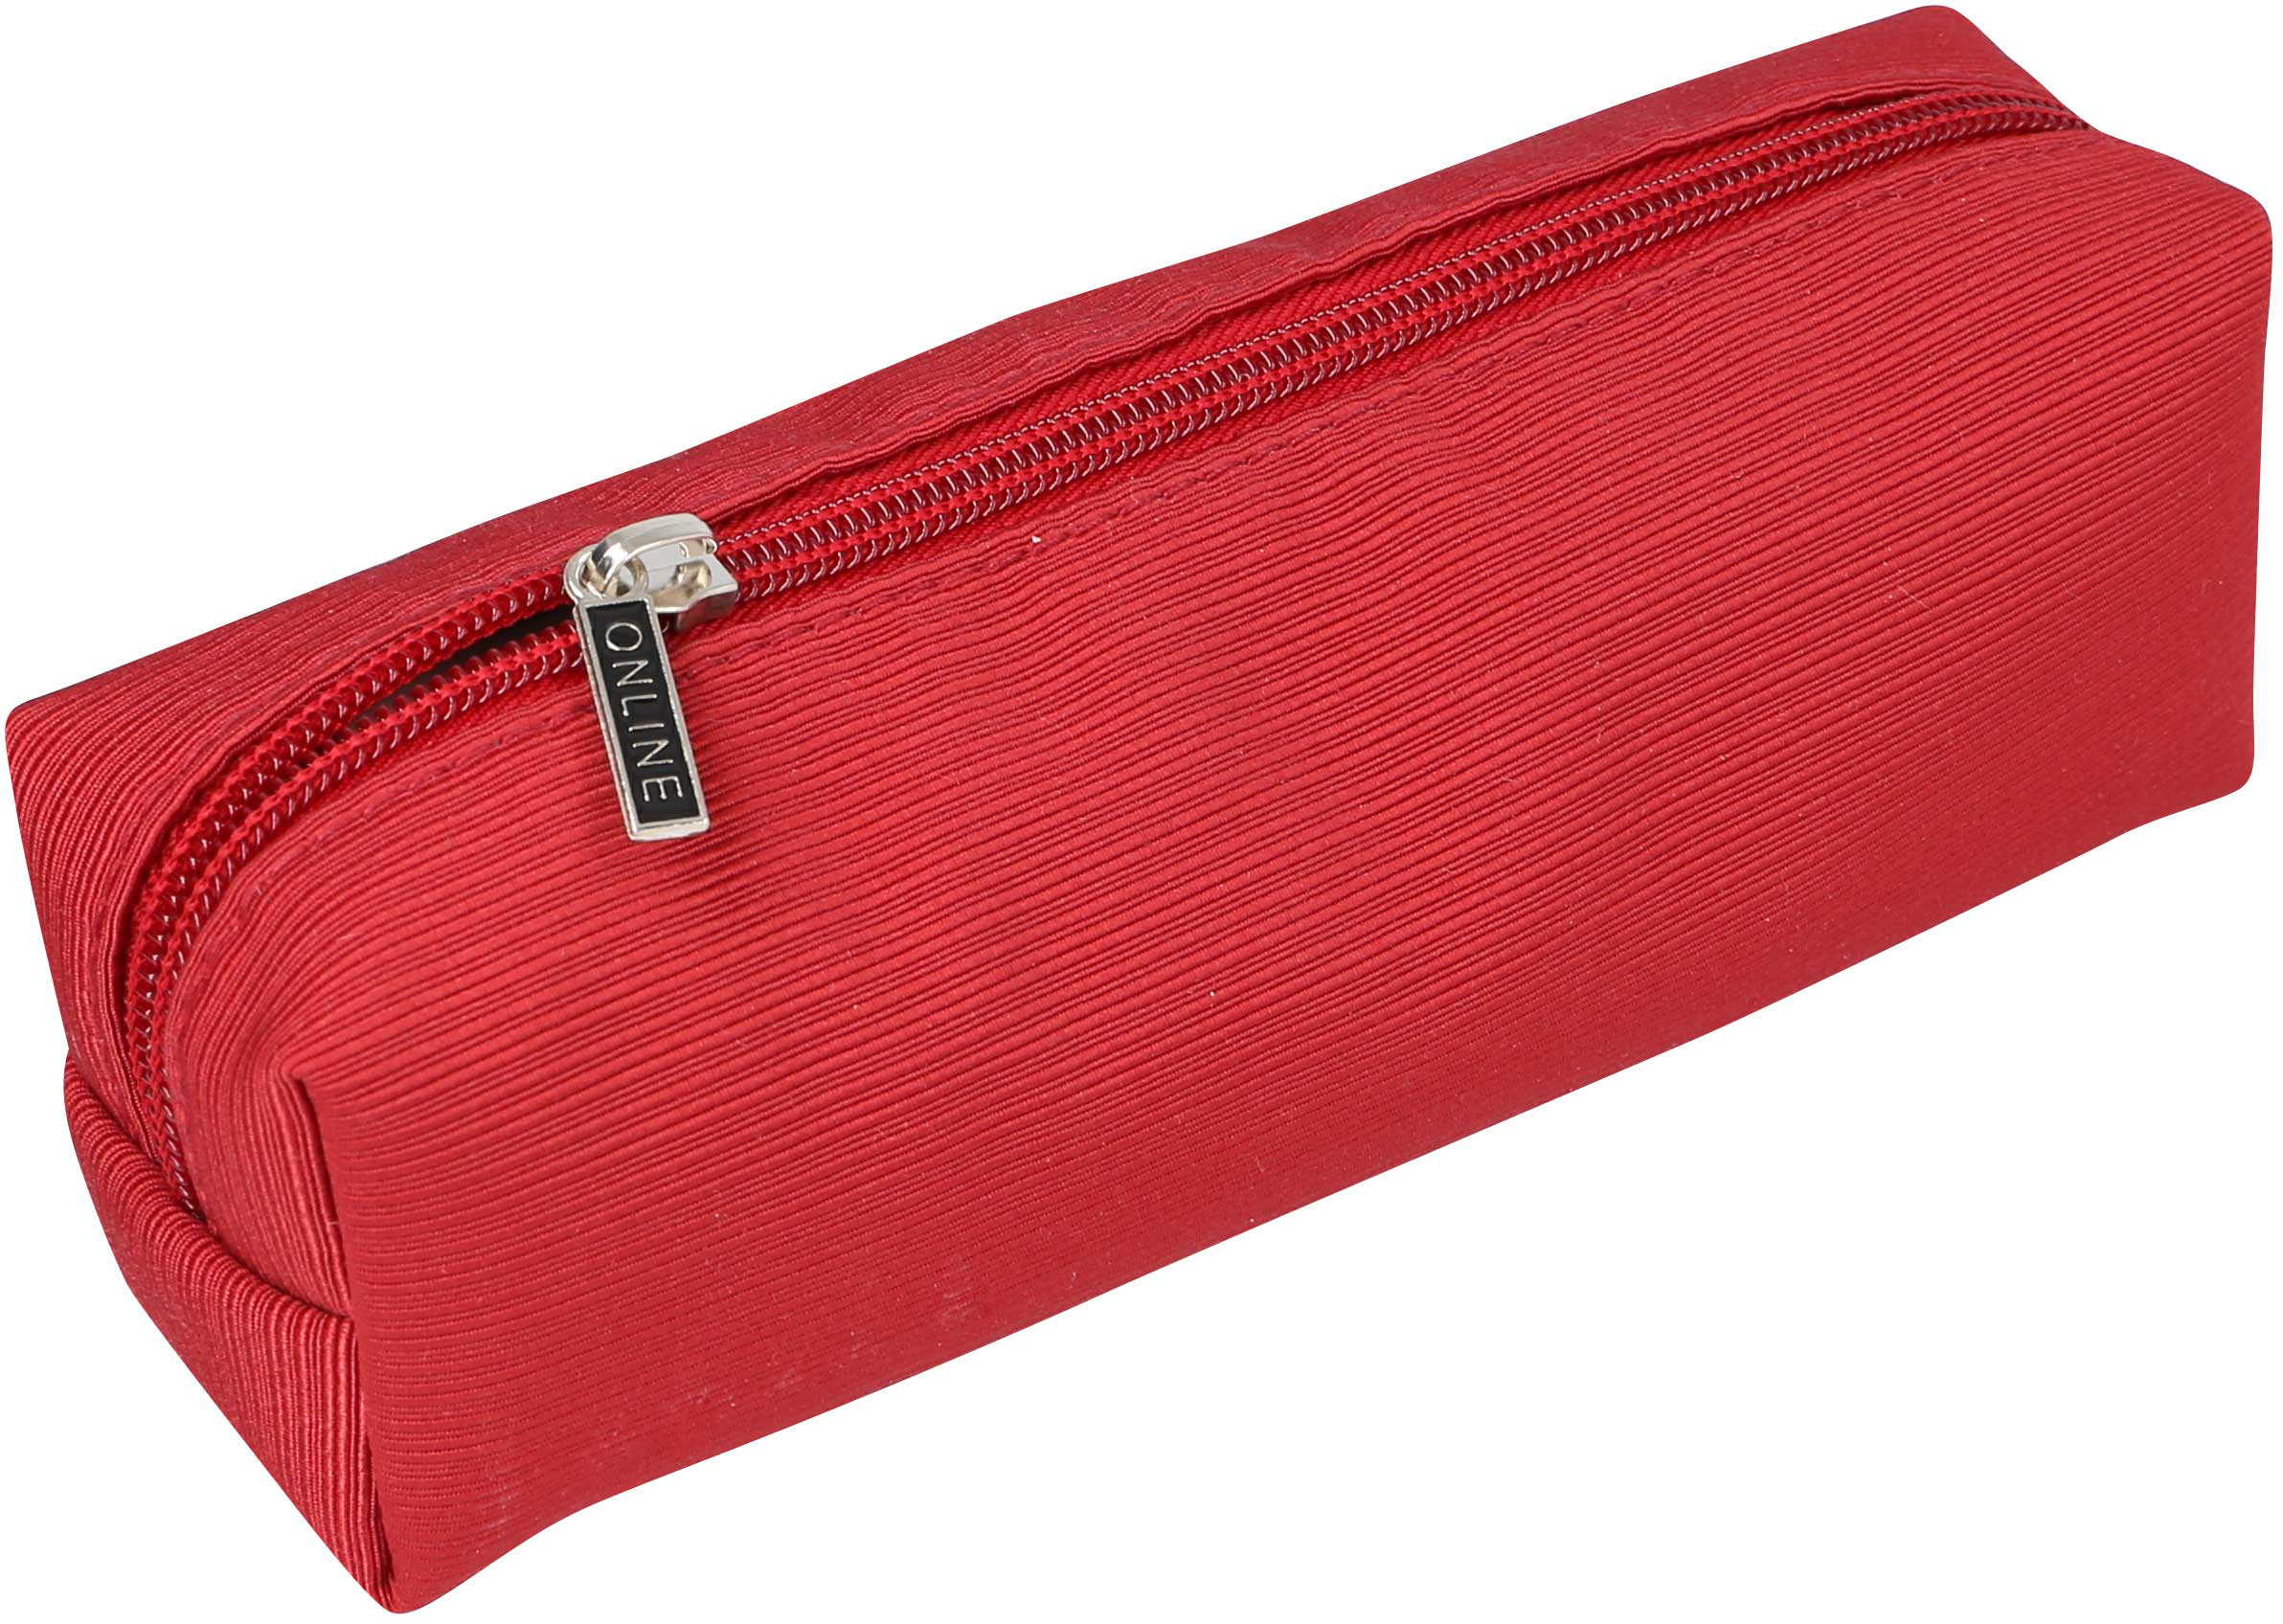 ONLINE Trousse 16979/6 Indian Summer Red 20x6cm Indian Summer Red 20x6cm